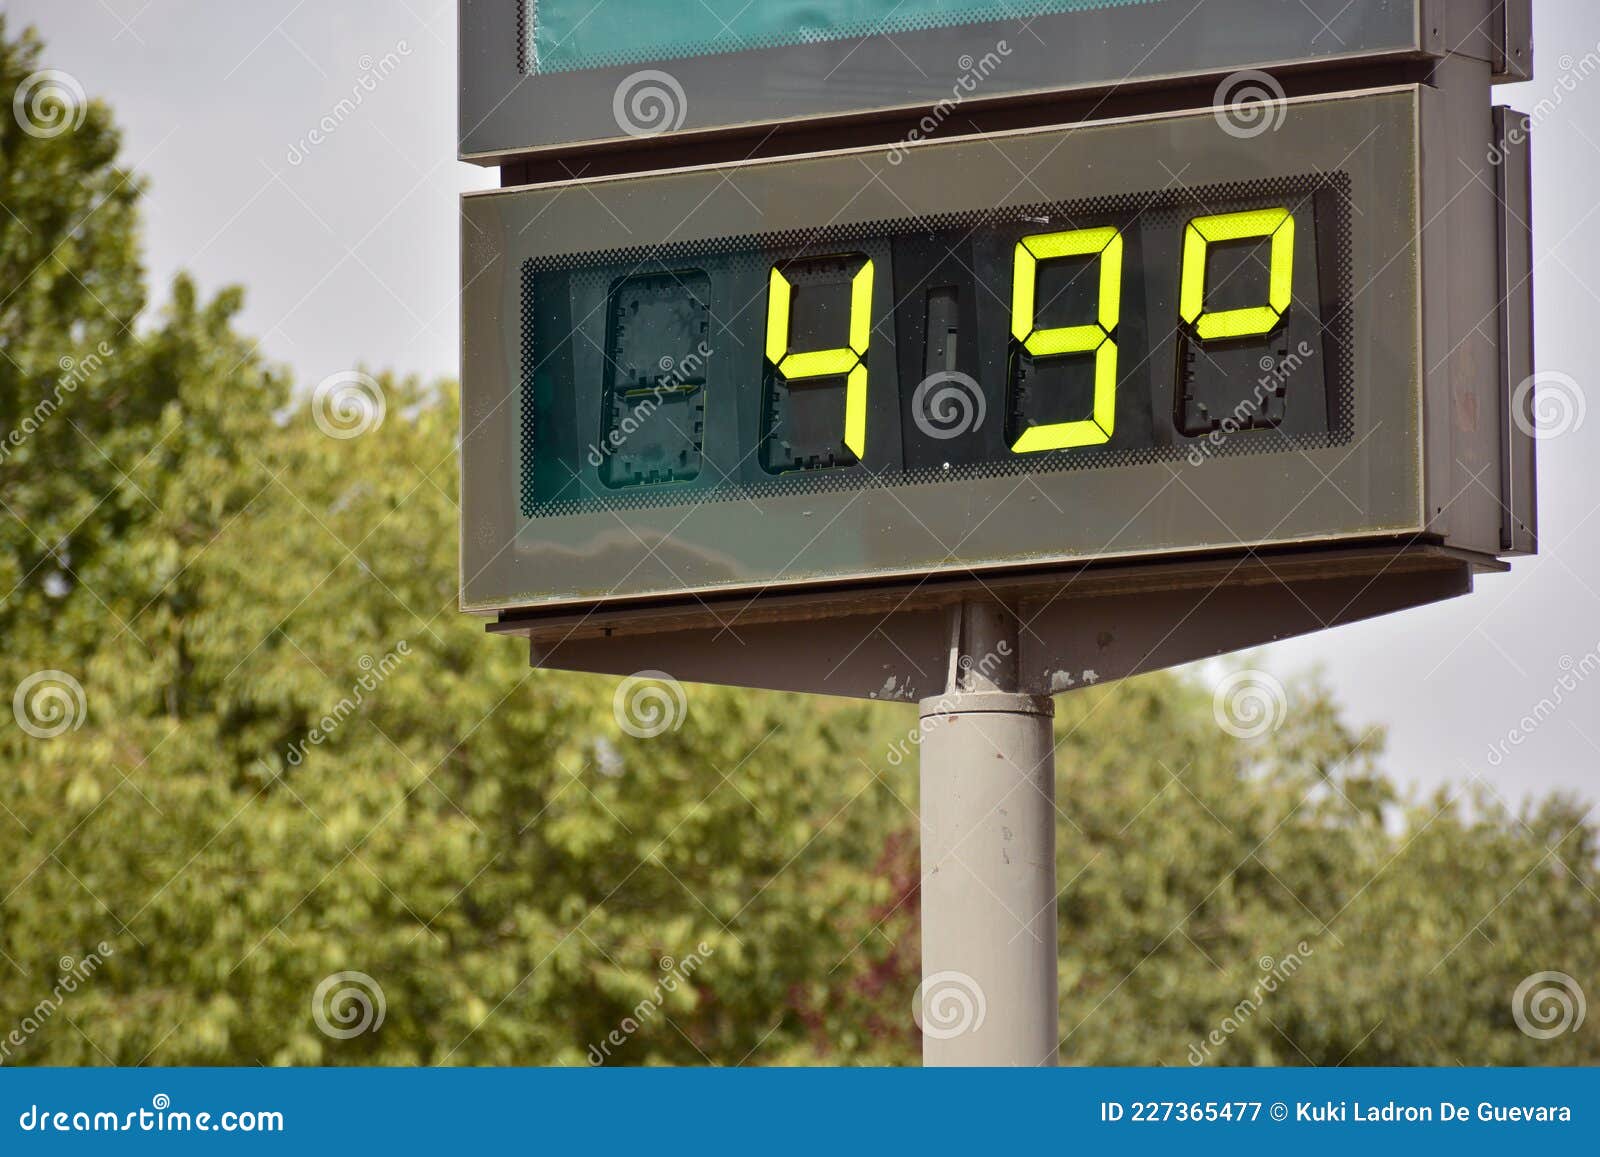 street thermometer marking 49 degrees